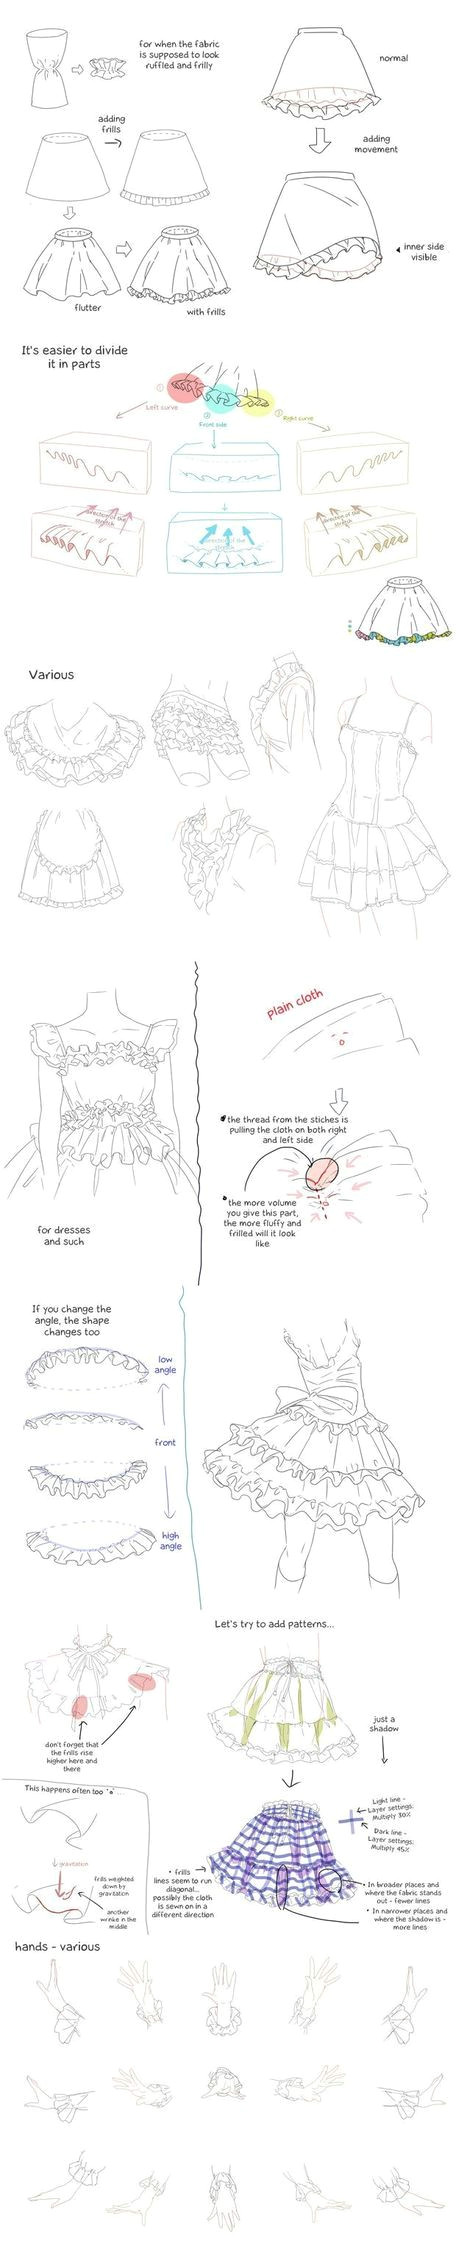 Clothes Drawing Ideas Clothing Drawing Reference Guide Drawing References and